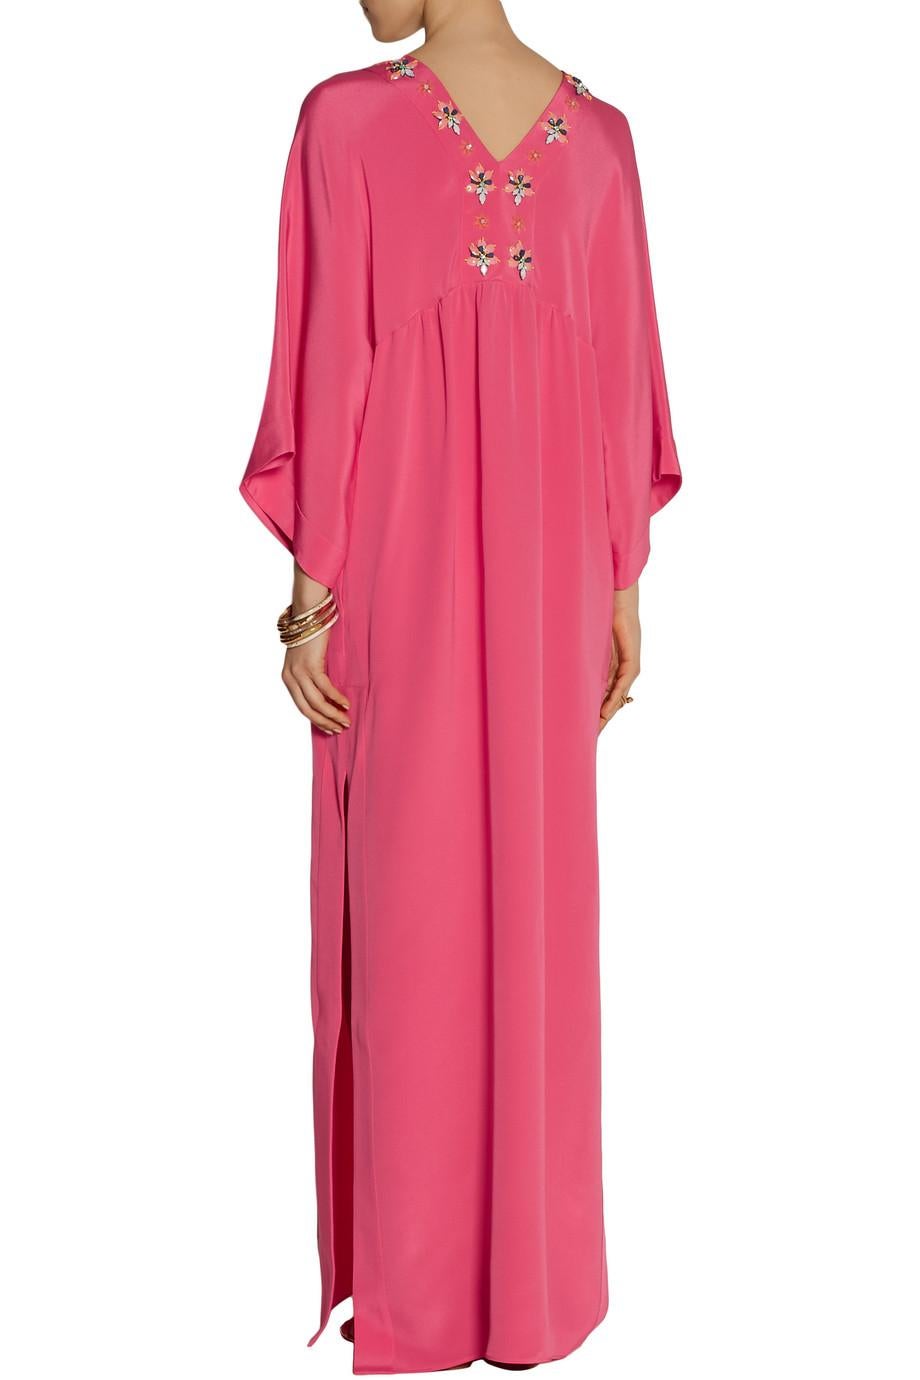 NEW Emilio Pucci Silk Cady Embroidered Kaftan Maxi Dress Evening Gown 42 For Sale 6